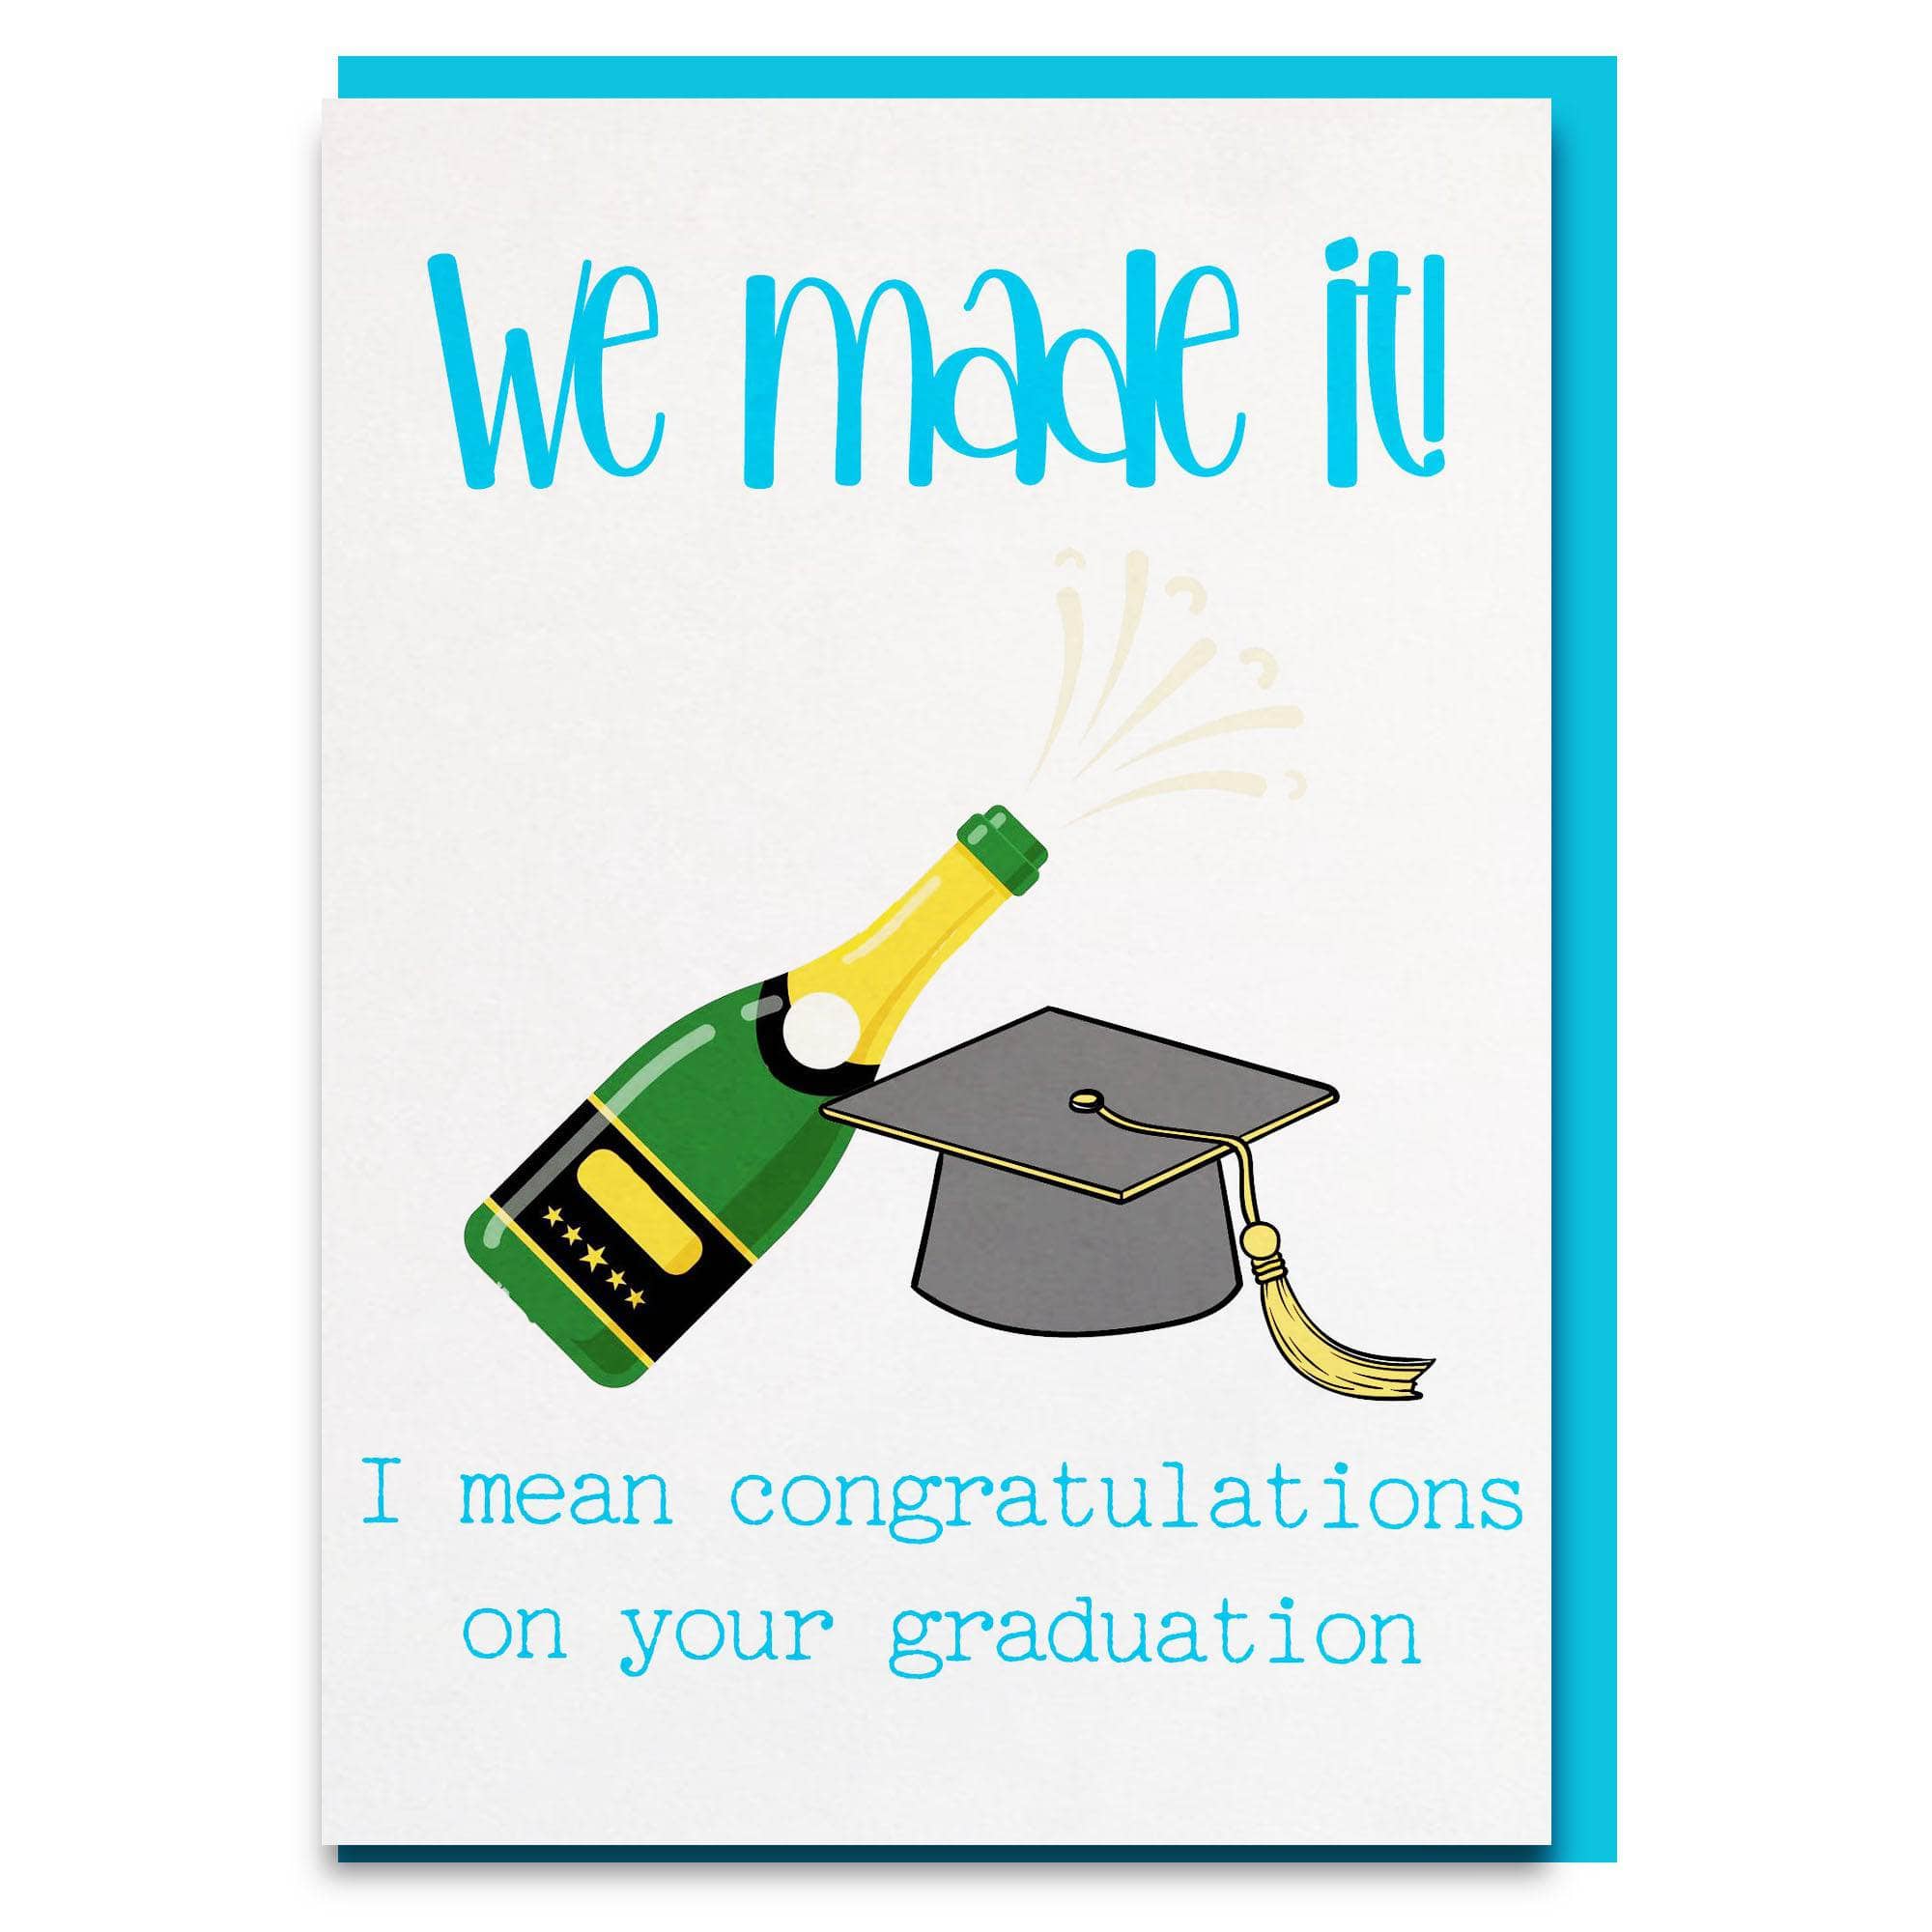 Funny and sweet "we made it" graduation congratulations card for daughter